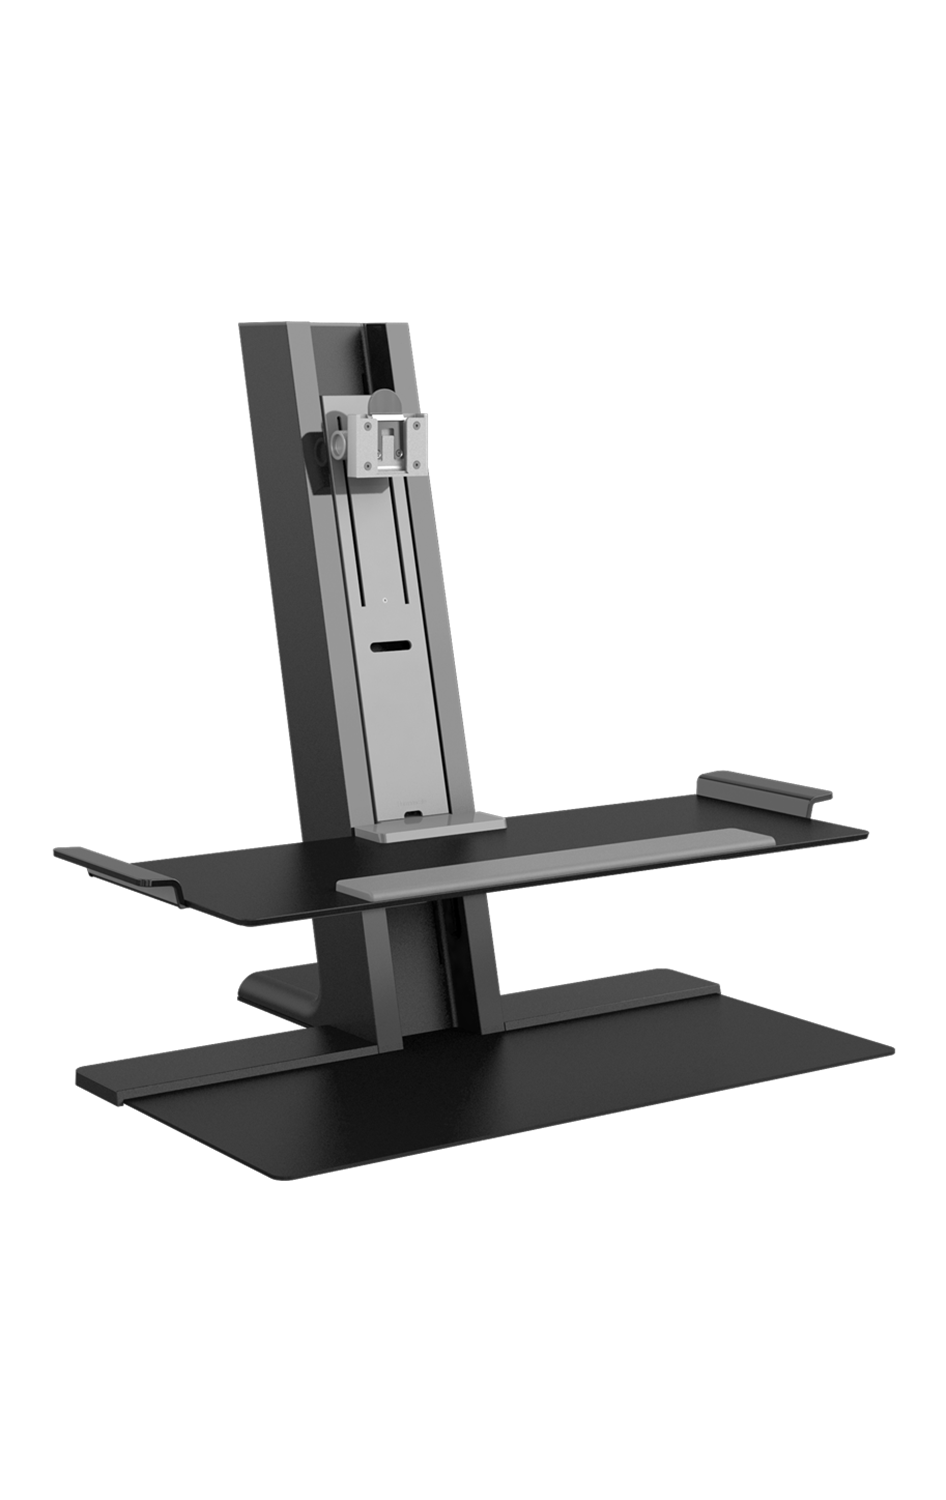 Humanscale Monitor Sit/Stand FREESTANDING BASE / Black Humanscale Quickstand Sit to Stand Workstation